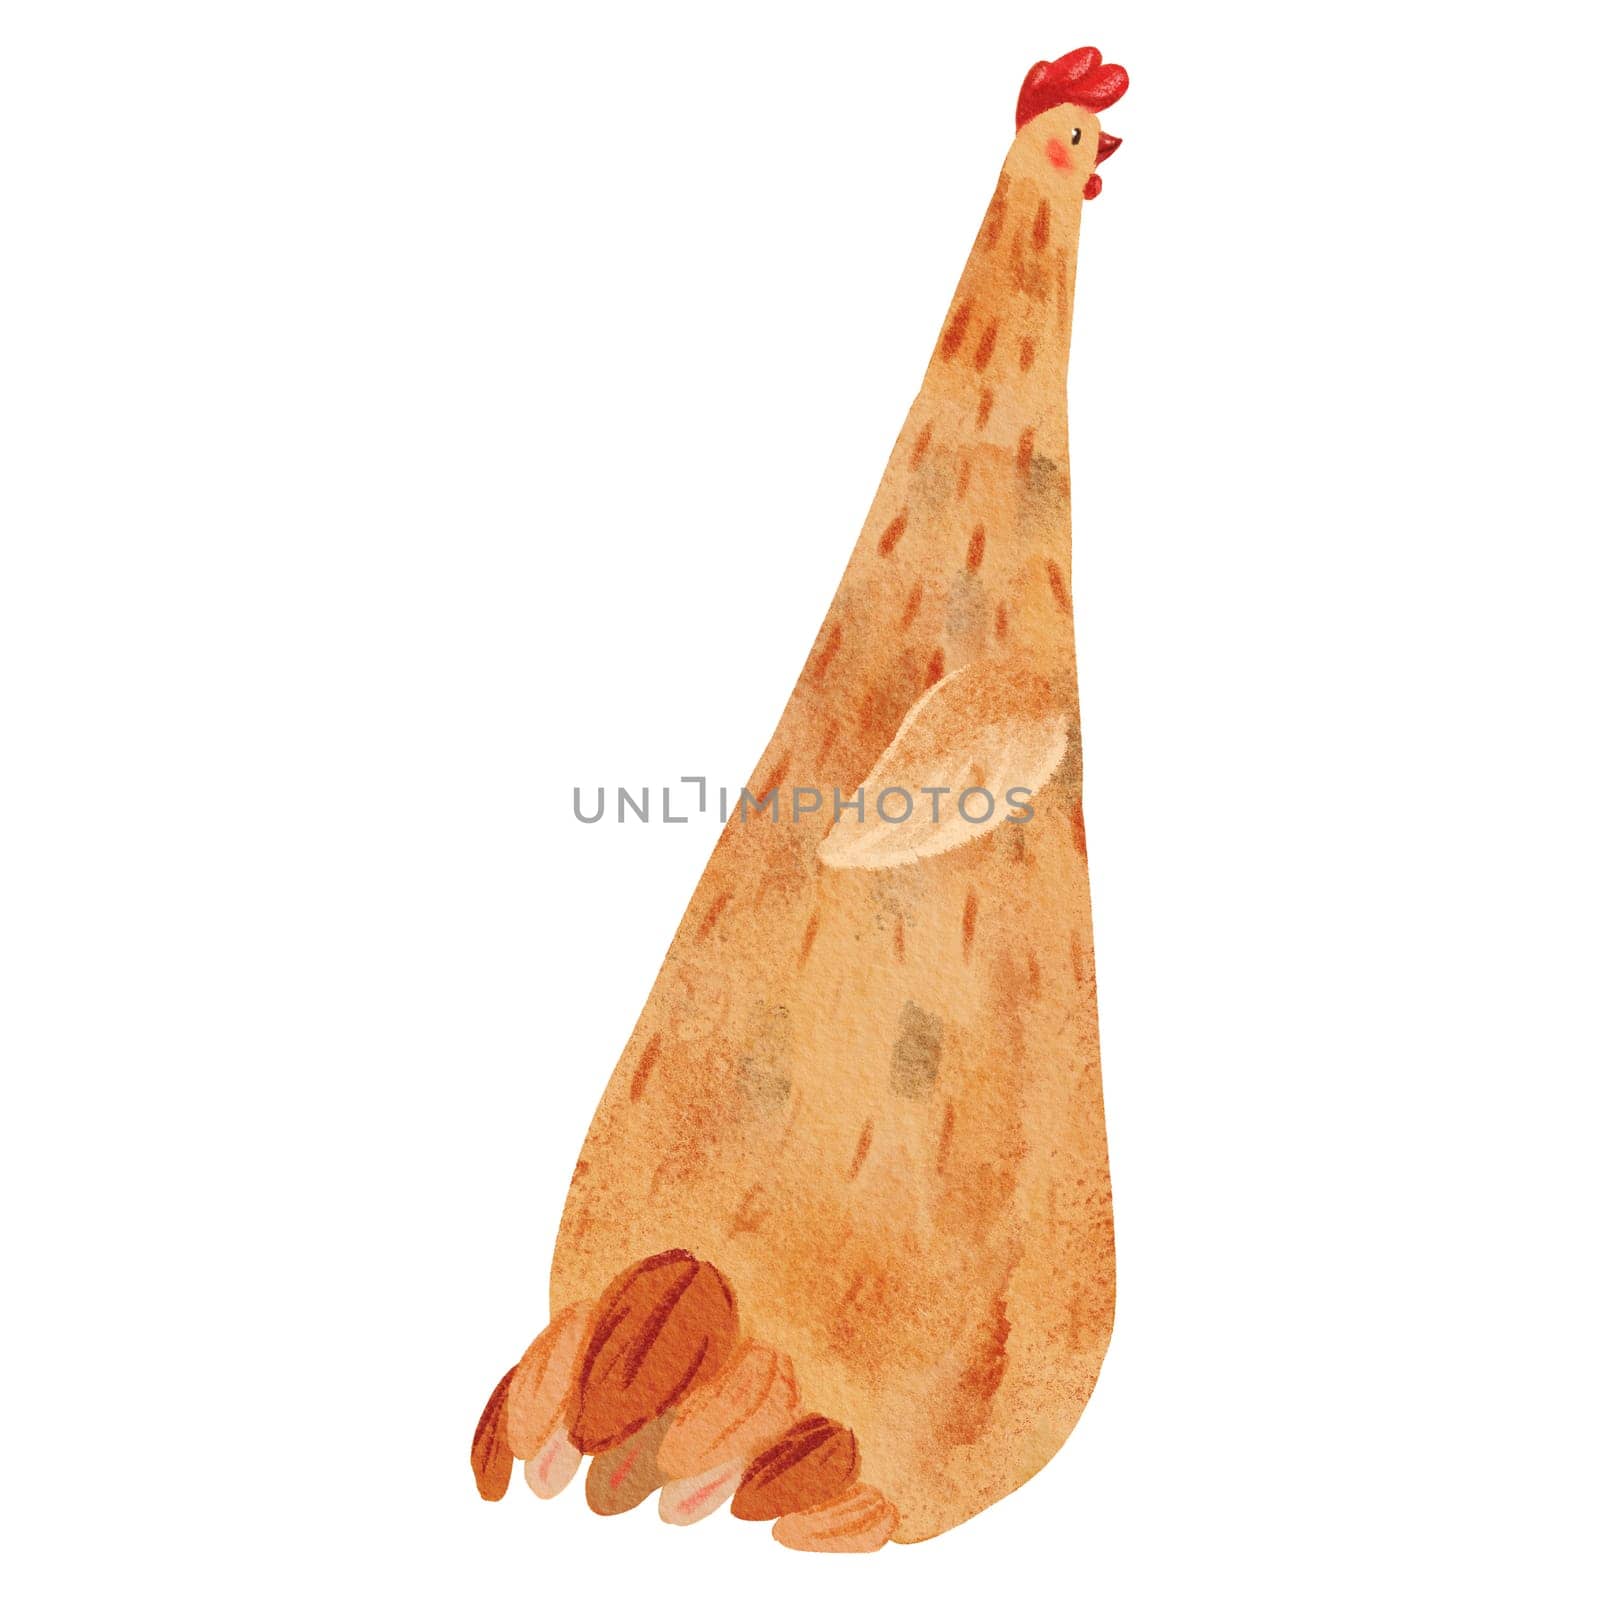 Watercolor artwork in a playful cartoon style. a speckled hen. The illustration captures the whimsy chicken. Perfect for creating a light-hearted and cheerful ambiance, for children's designs.